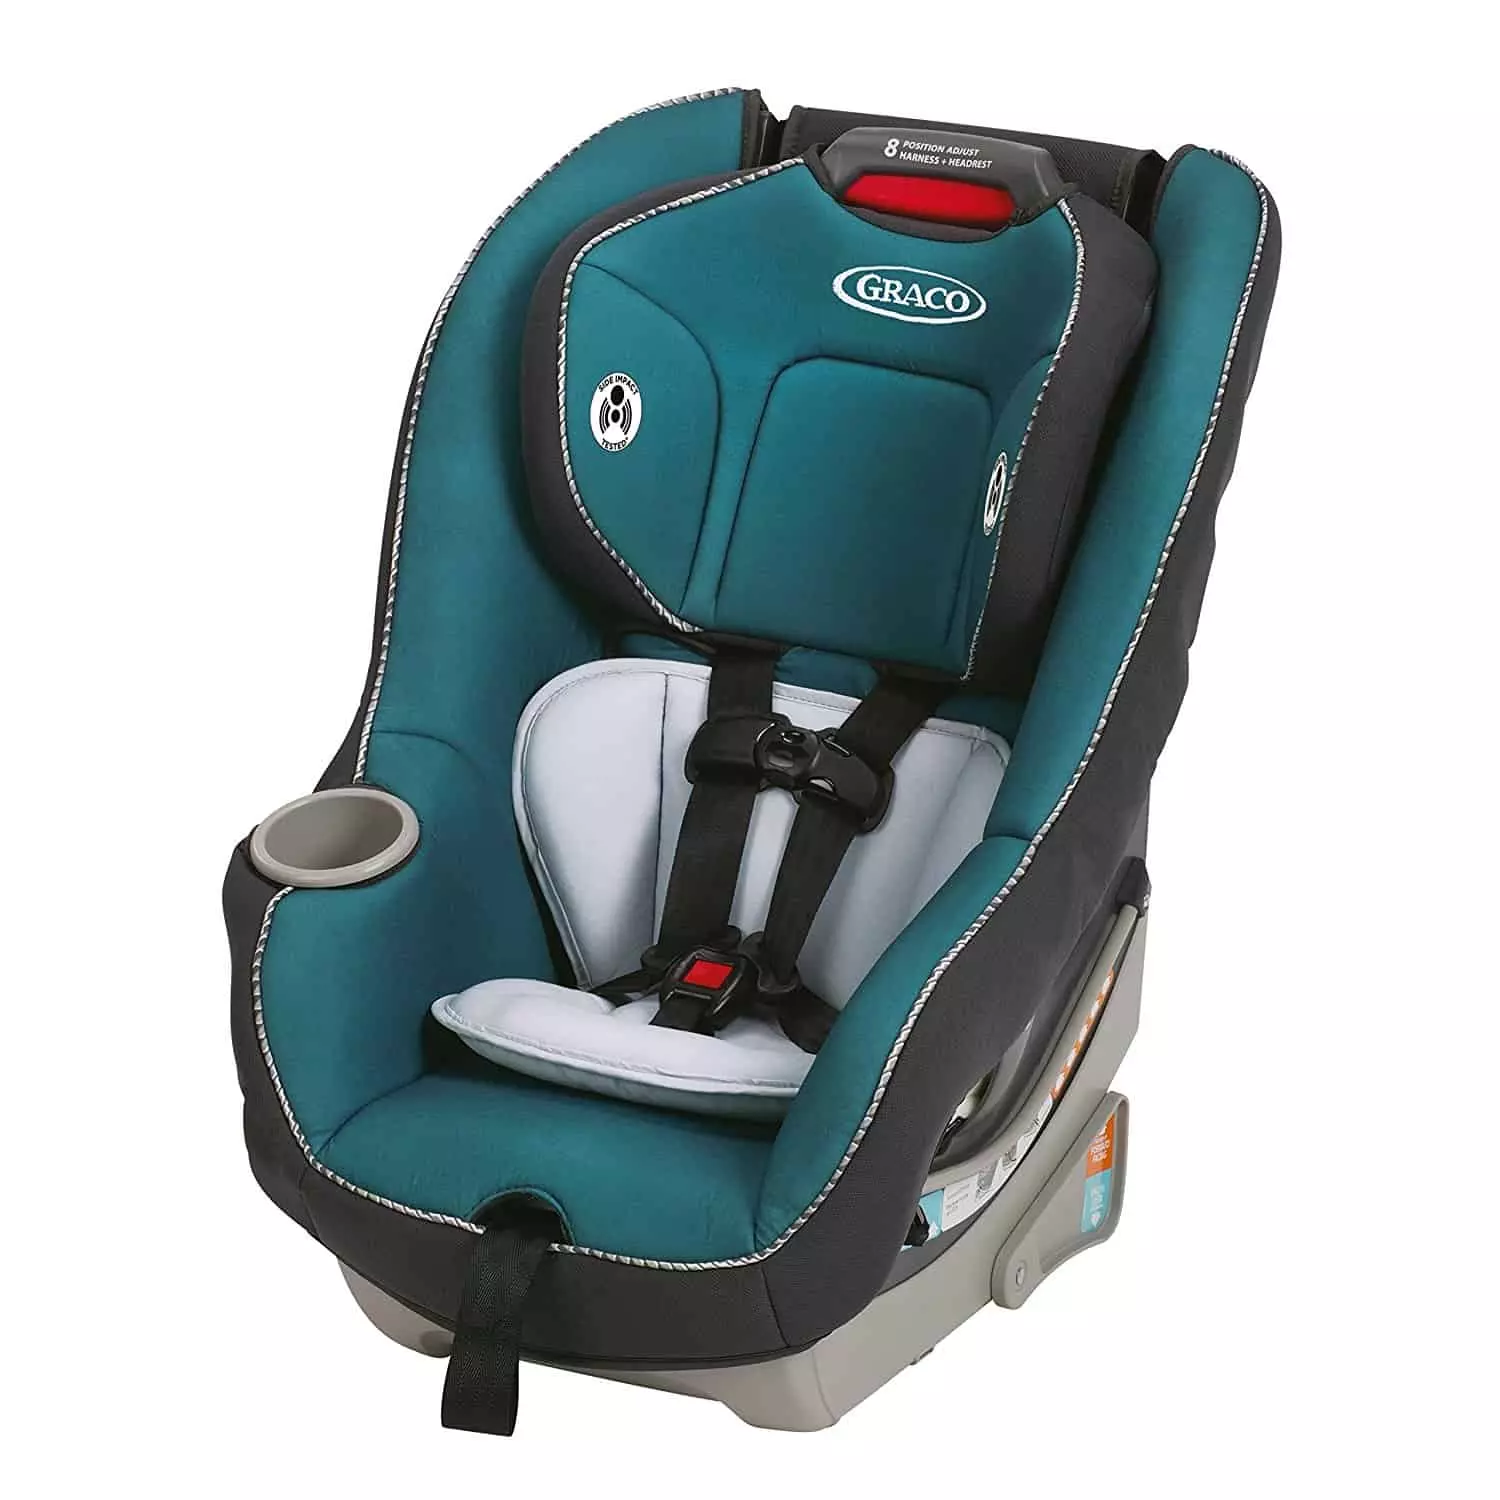 Convertible Car Seat Review: Graco Contender 65